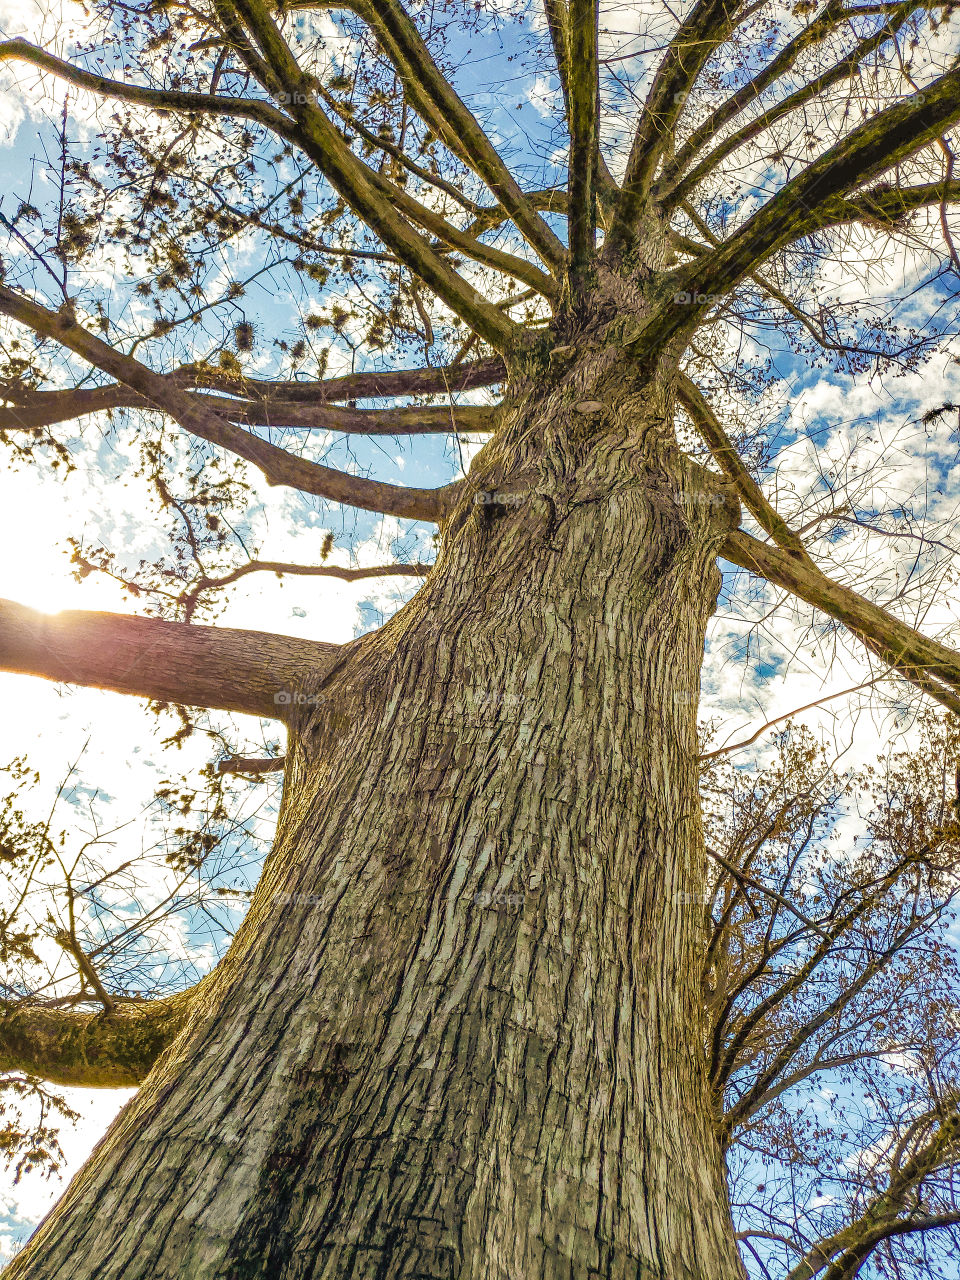 A view looking up an old mature bare tree in the winter season on a partly cloudy day with the sun peering through on the left.